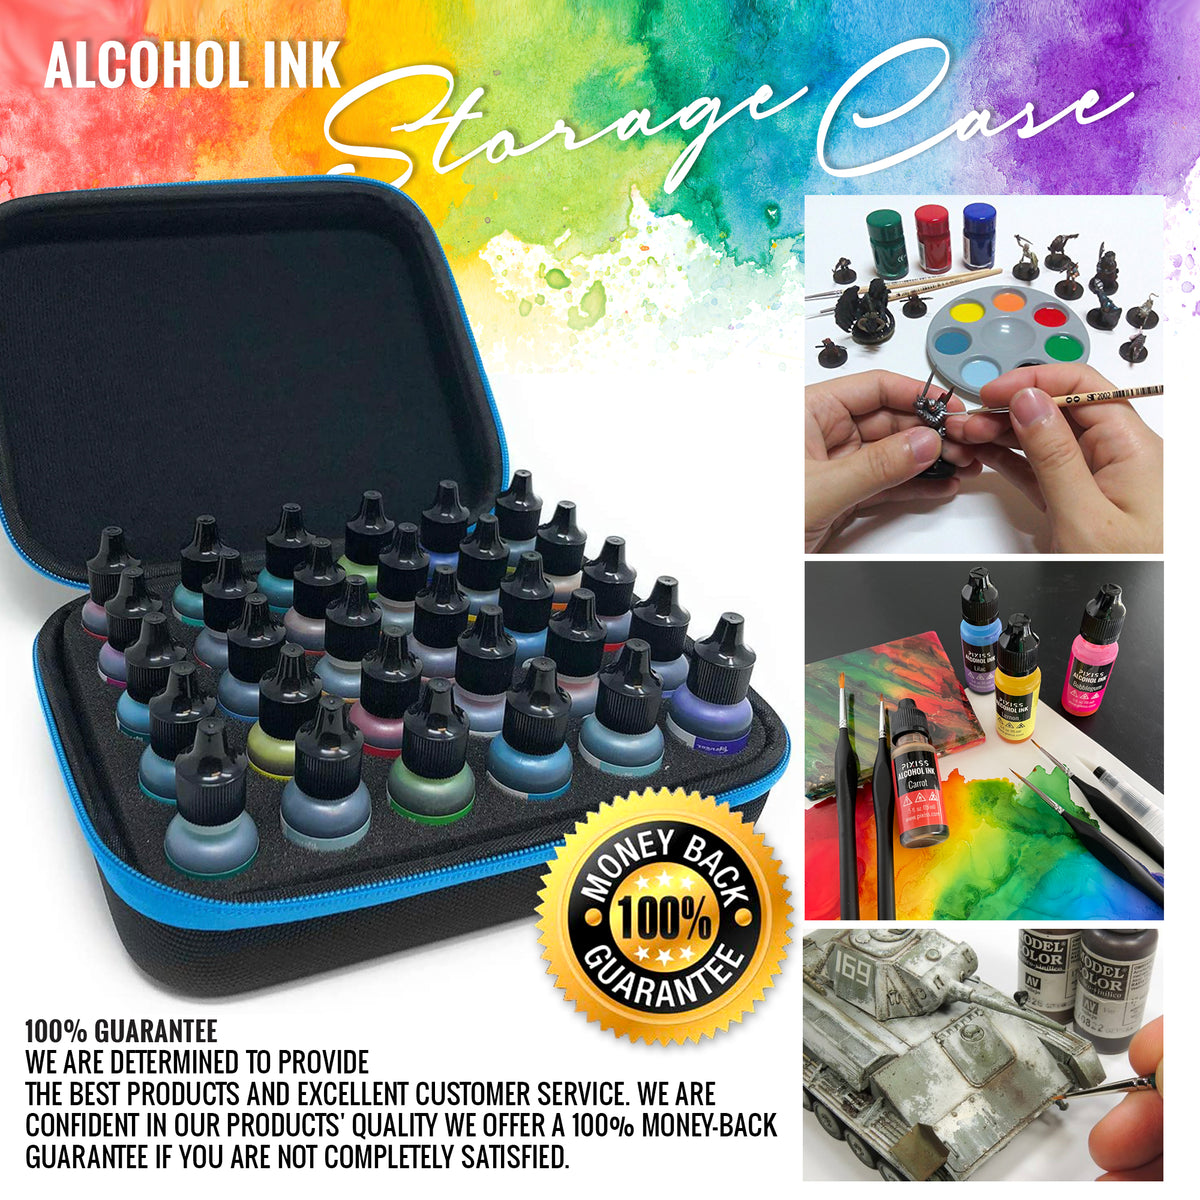  30x Tim Holtz Alcohol Ink .5oz Bottles (Assorted Colors),  Pixiss Alcohol Ink Storage Carrying Case Organizer, Stores 30x 0.5-Ounce  Bottles of Alcohol Ink, Stickles, Glossy Accents or Reinkers, Travel